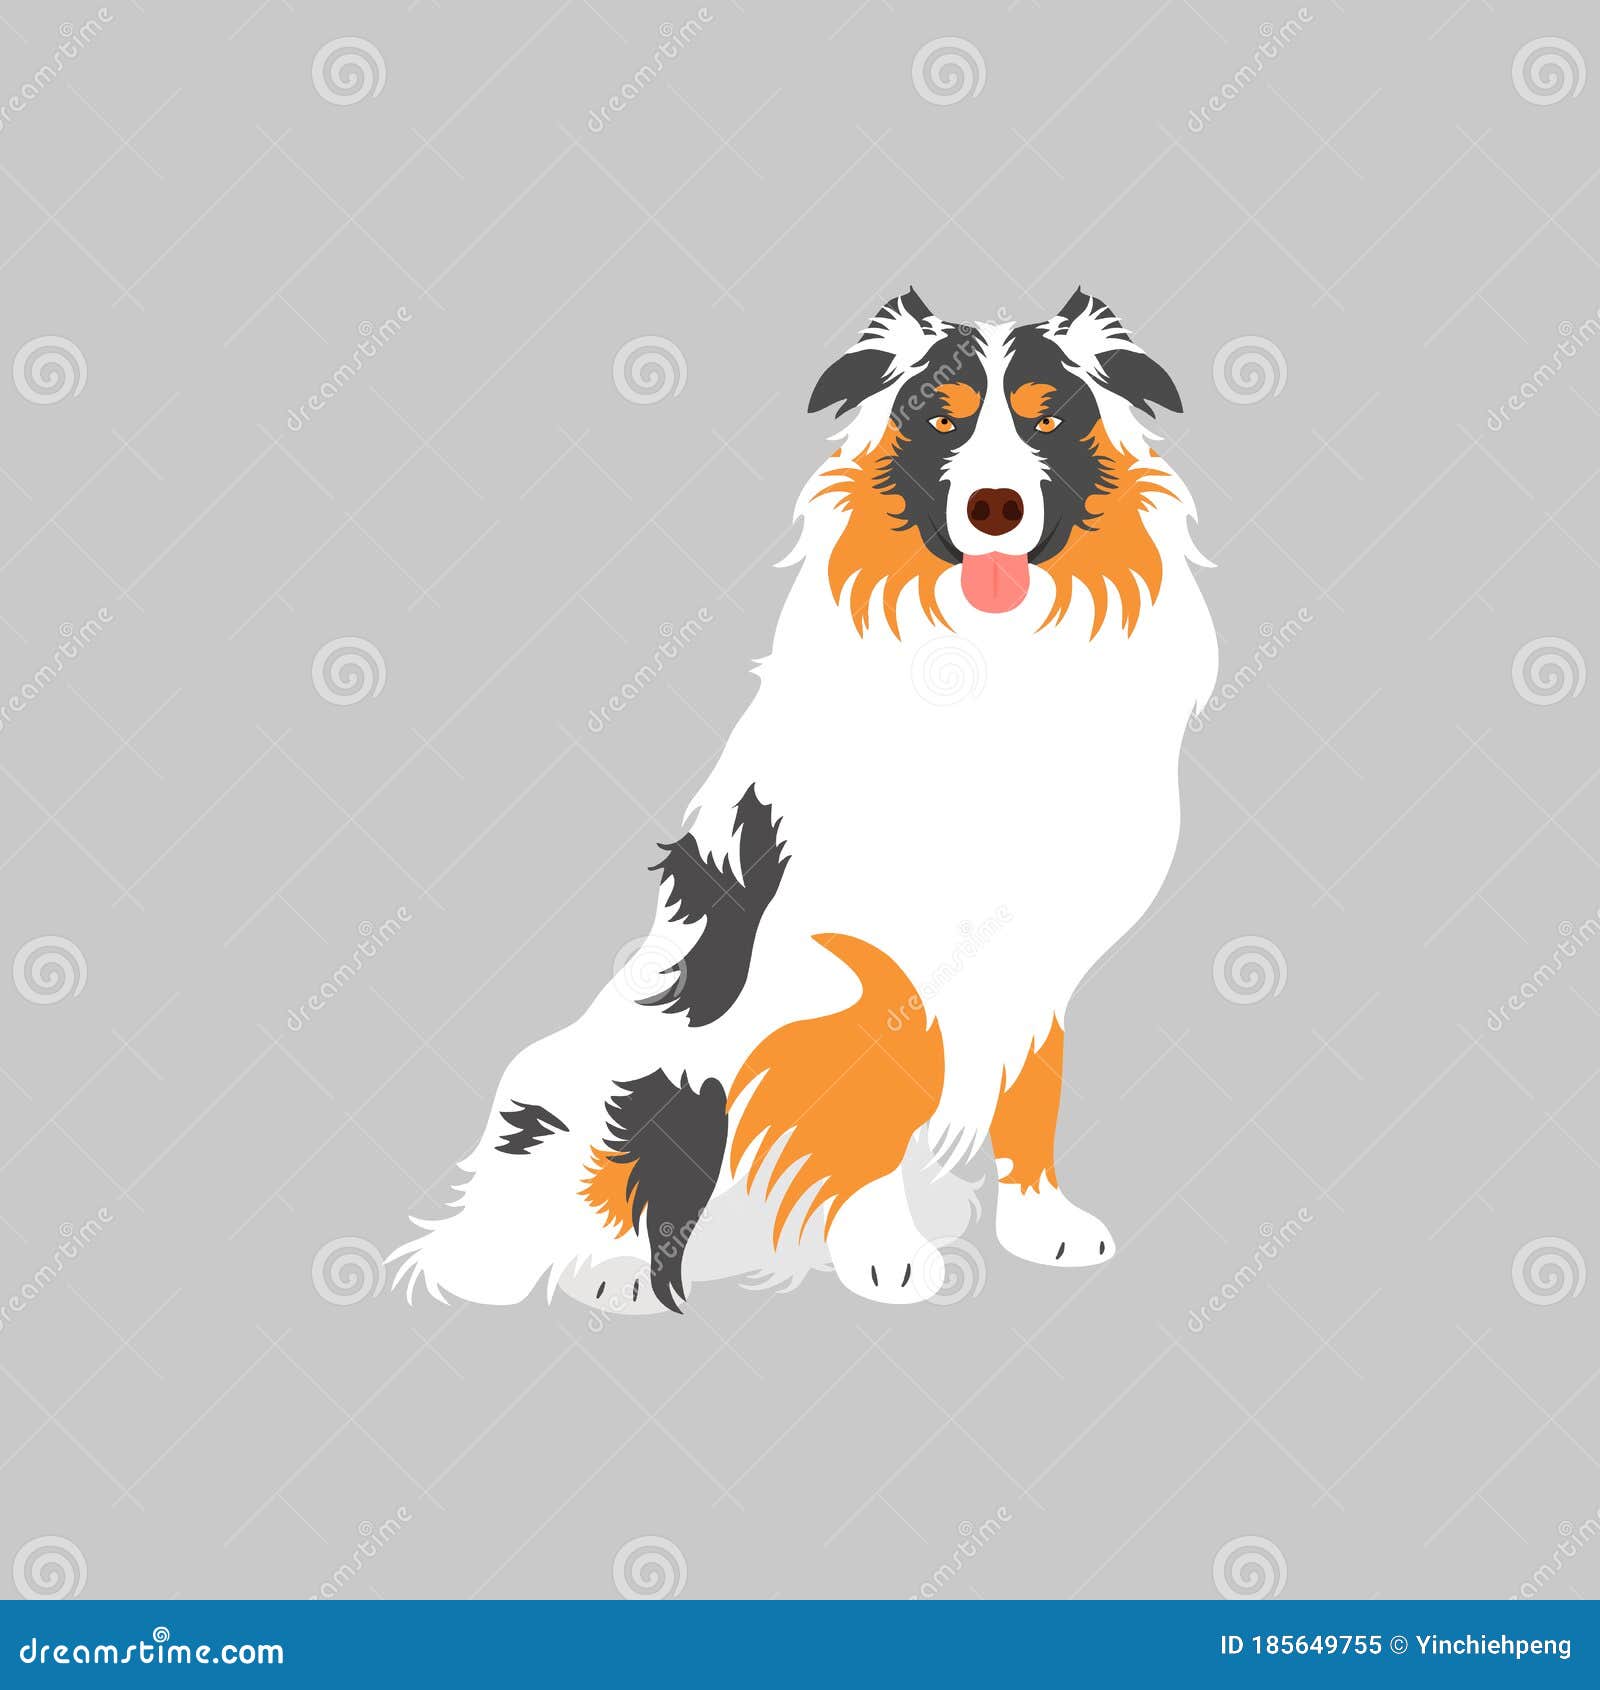 Australian Shepherd or Aussie Dog Sitting Isolated on Gray Background. Cartoon Dog Puppy Icon Vector. Hand Drawn Childish Stock Vector - Illustration of background, character: